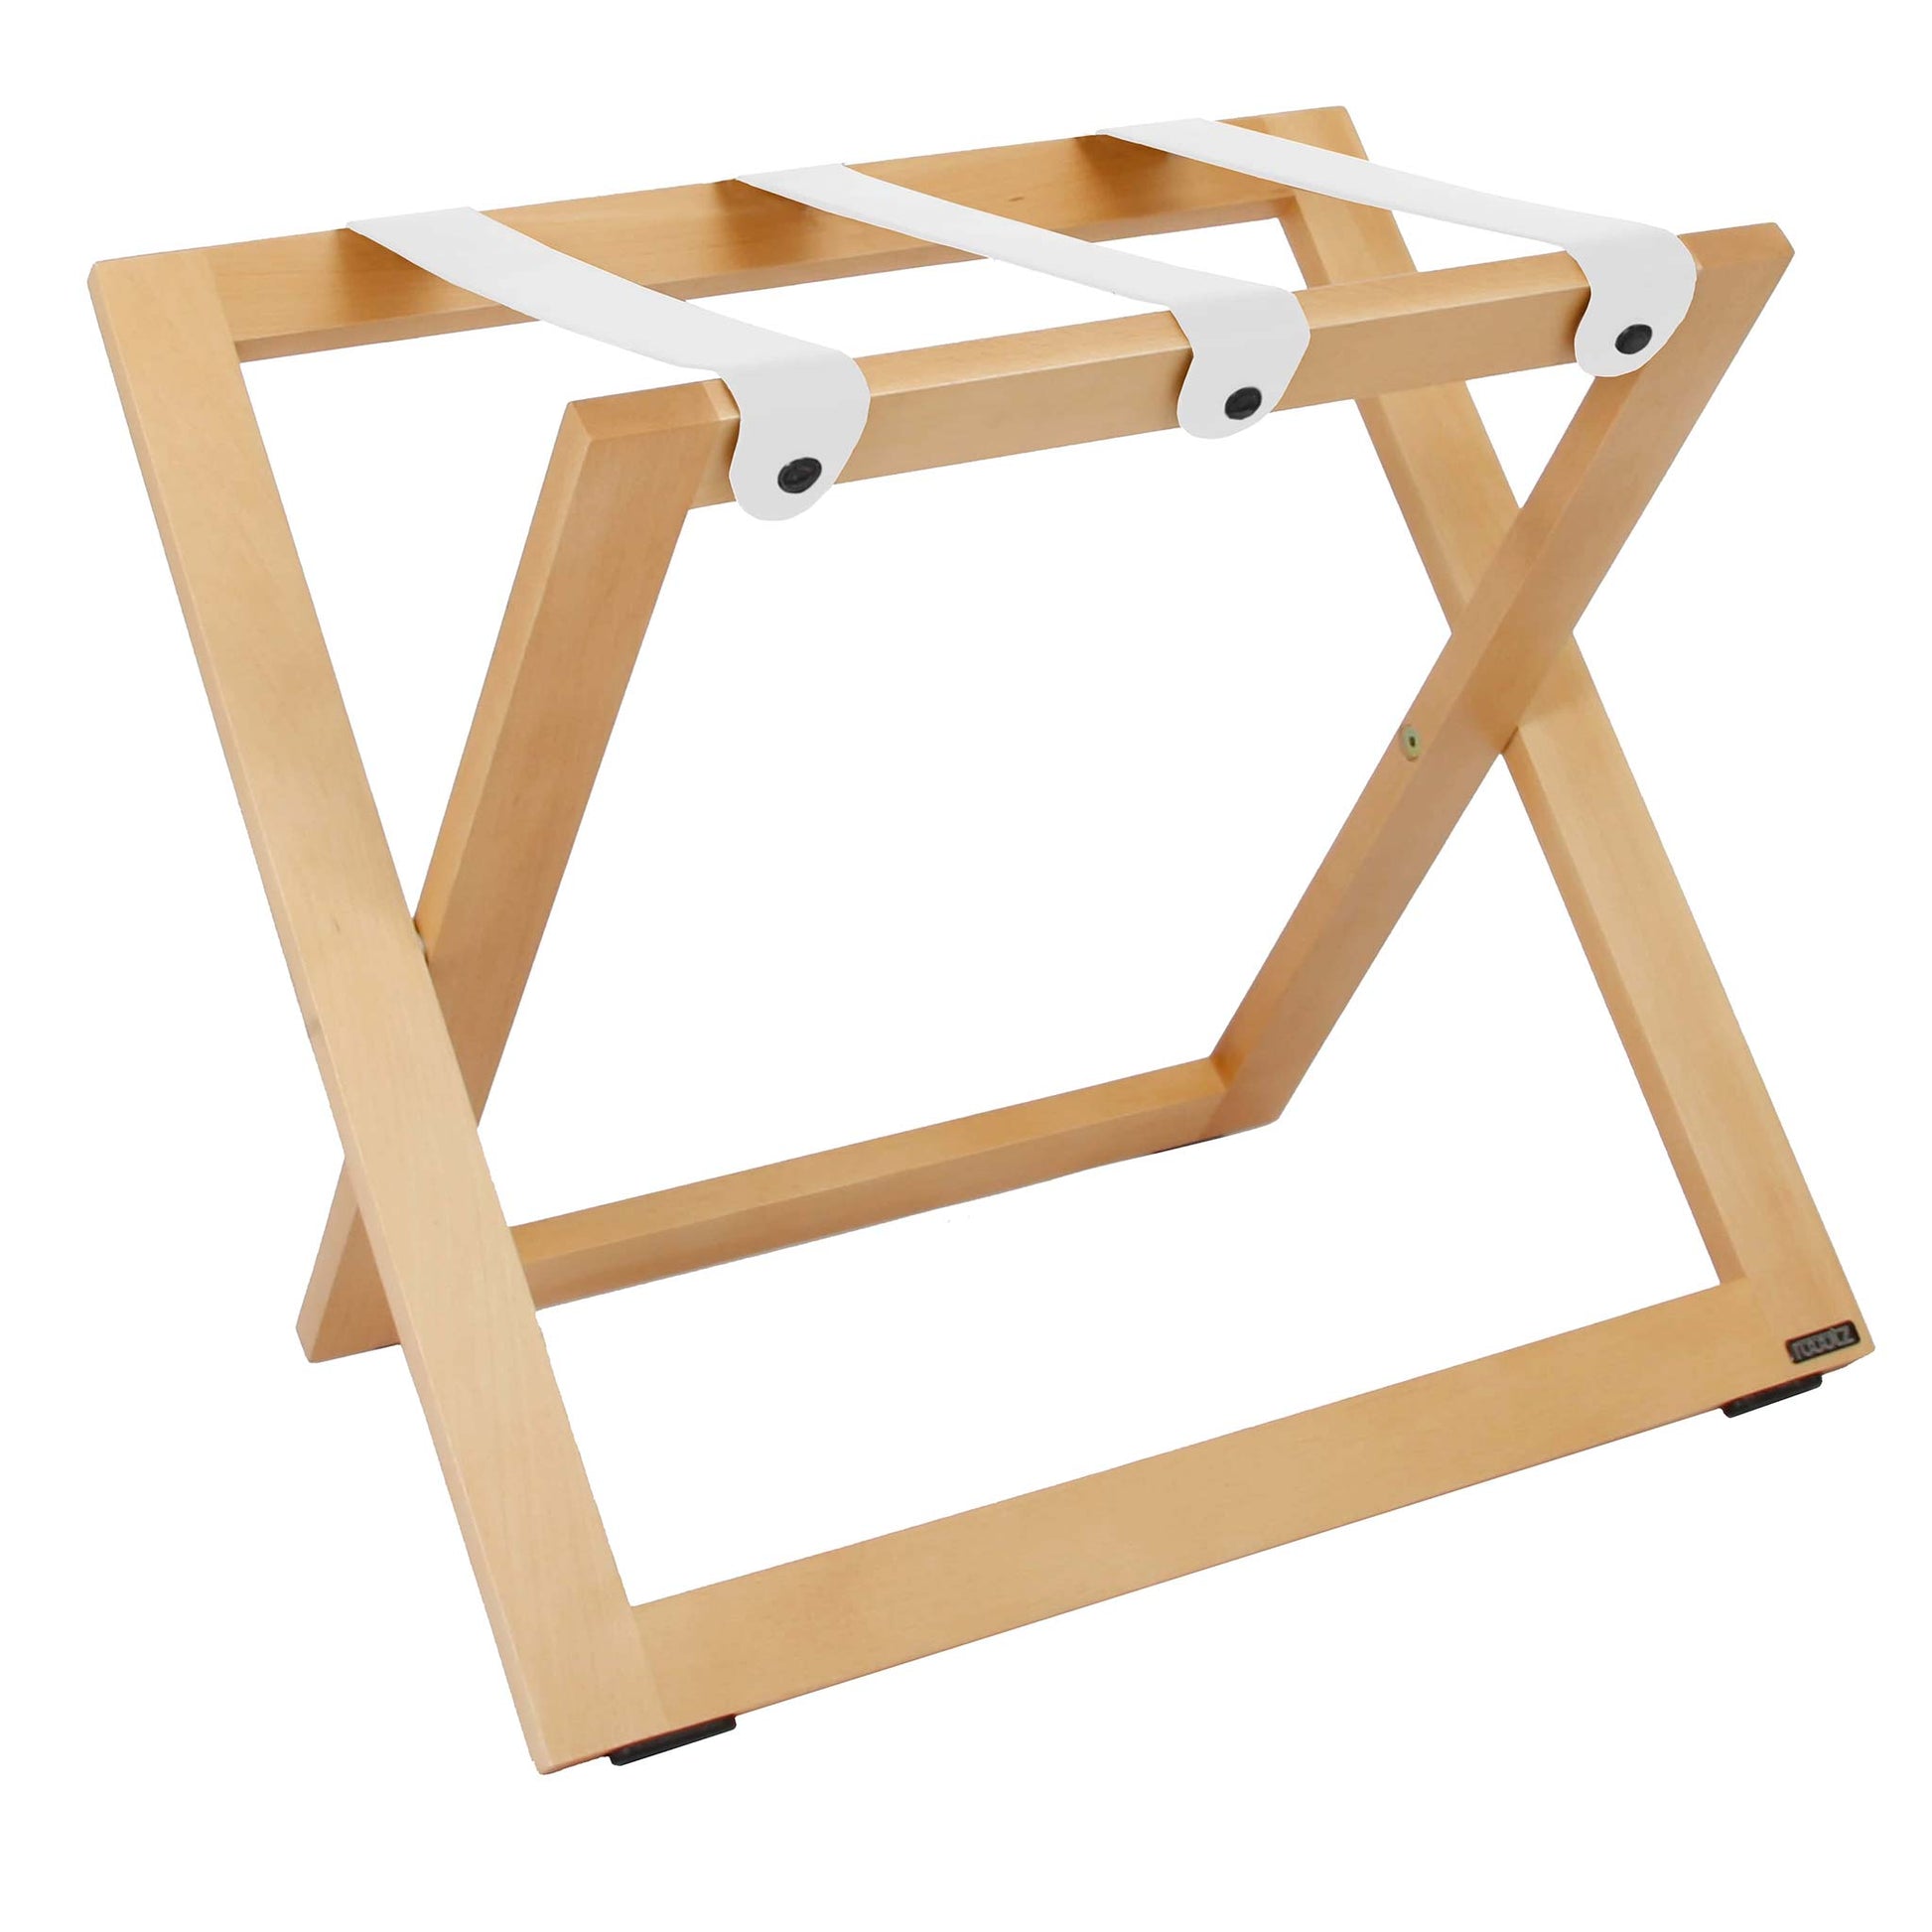 Roootz compact natural wooden hotel luggage rack with white leather straps